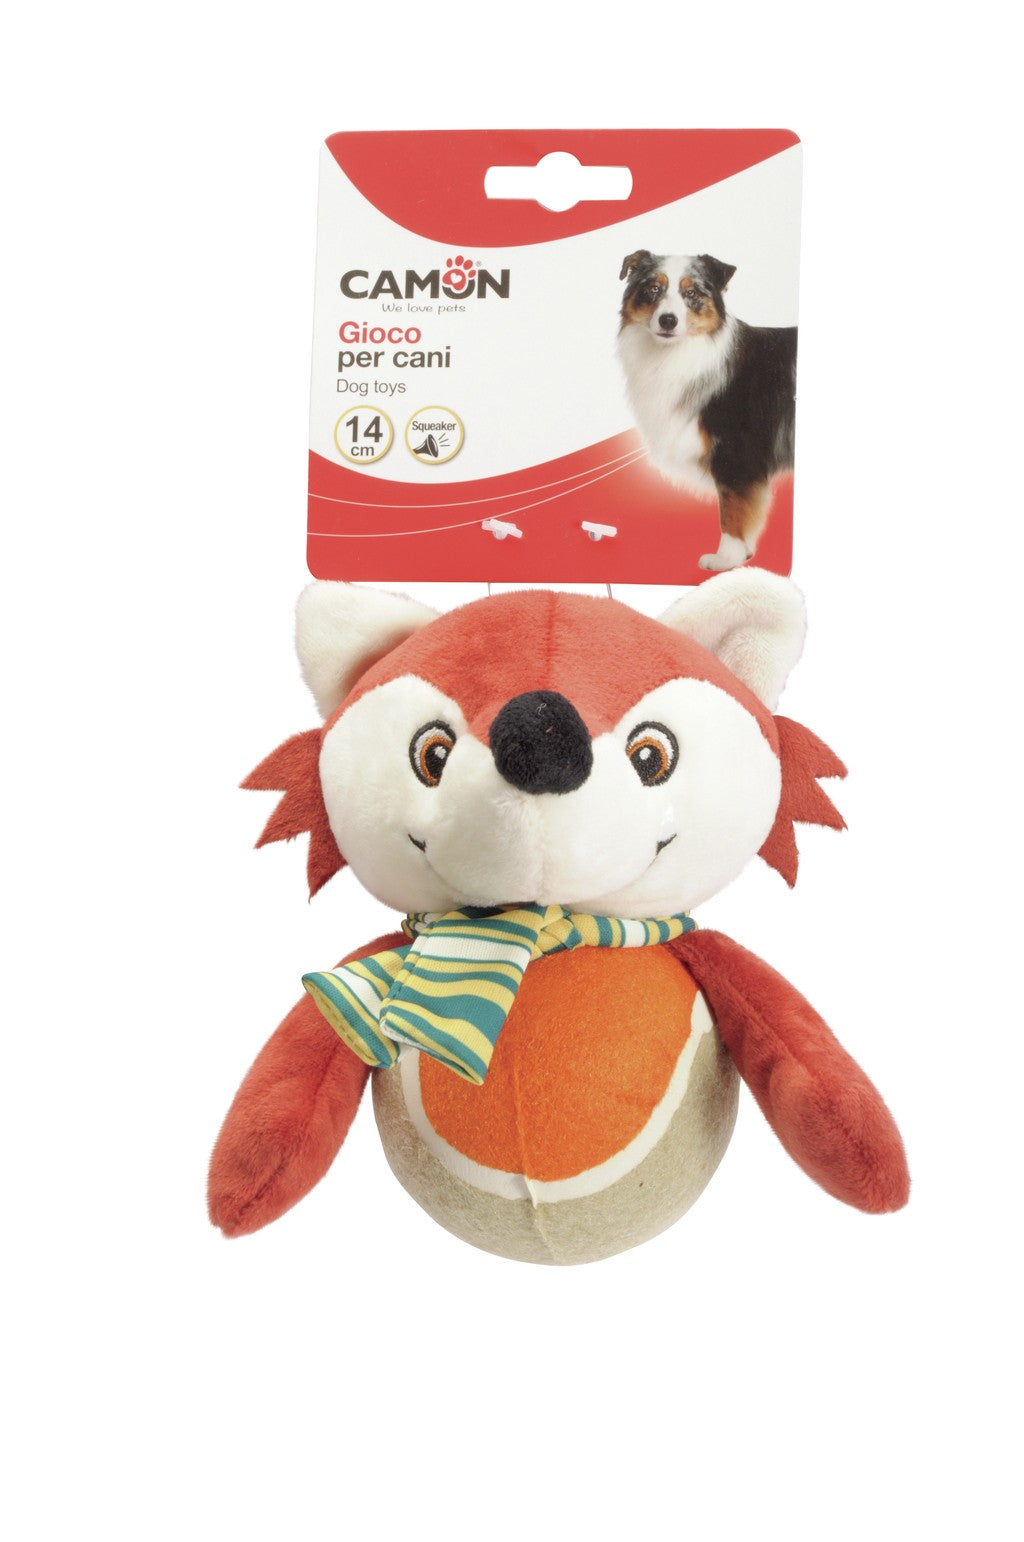 Camon Dog Toy - Plush Toy with Tennis Ball and Squeaker (14cm)